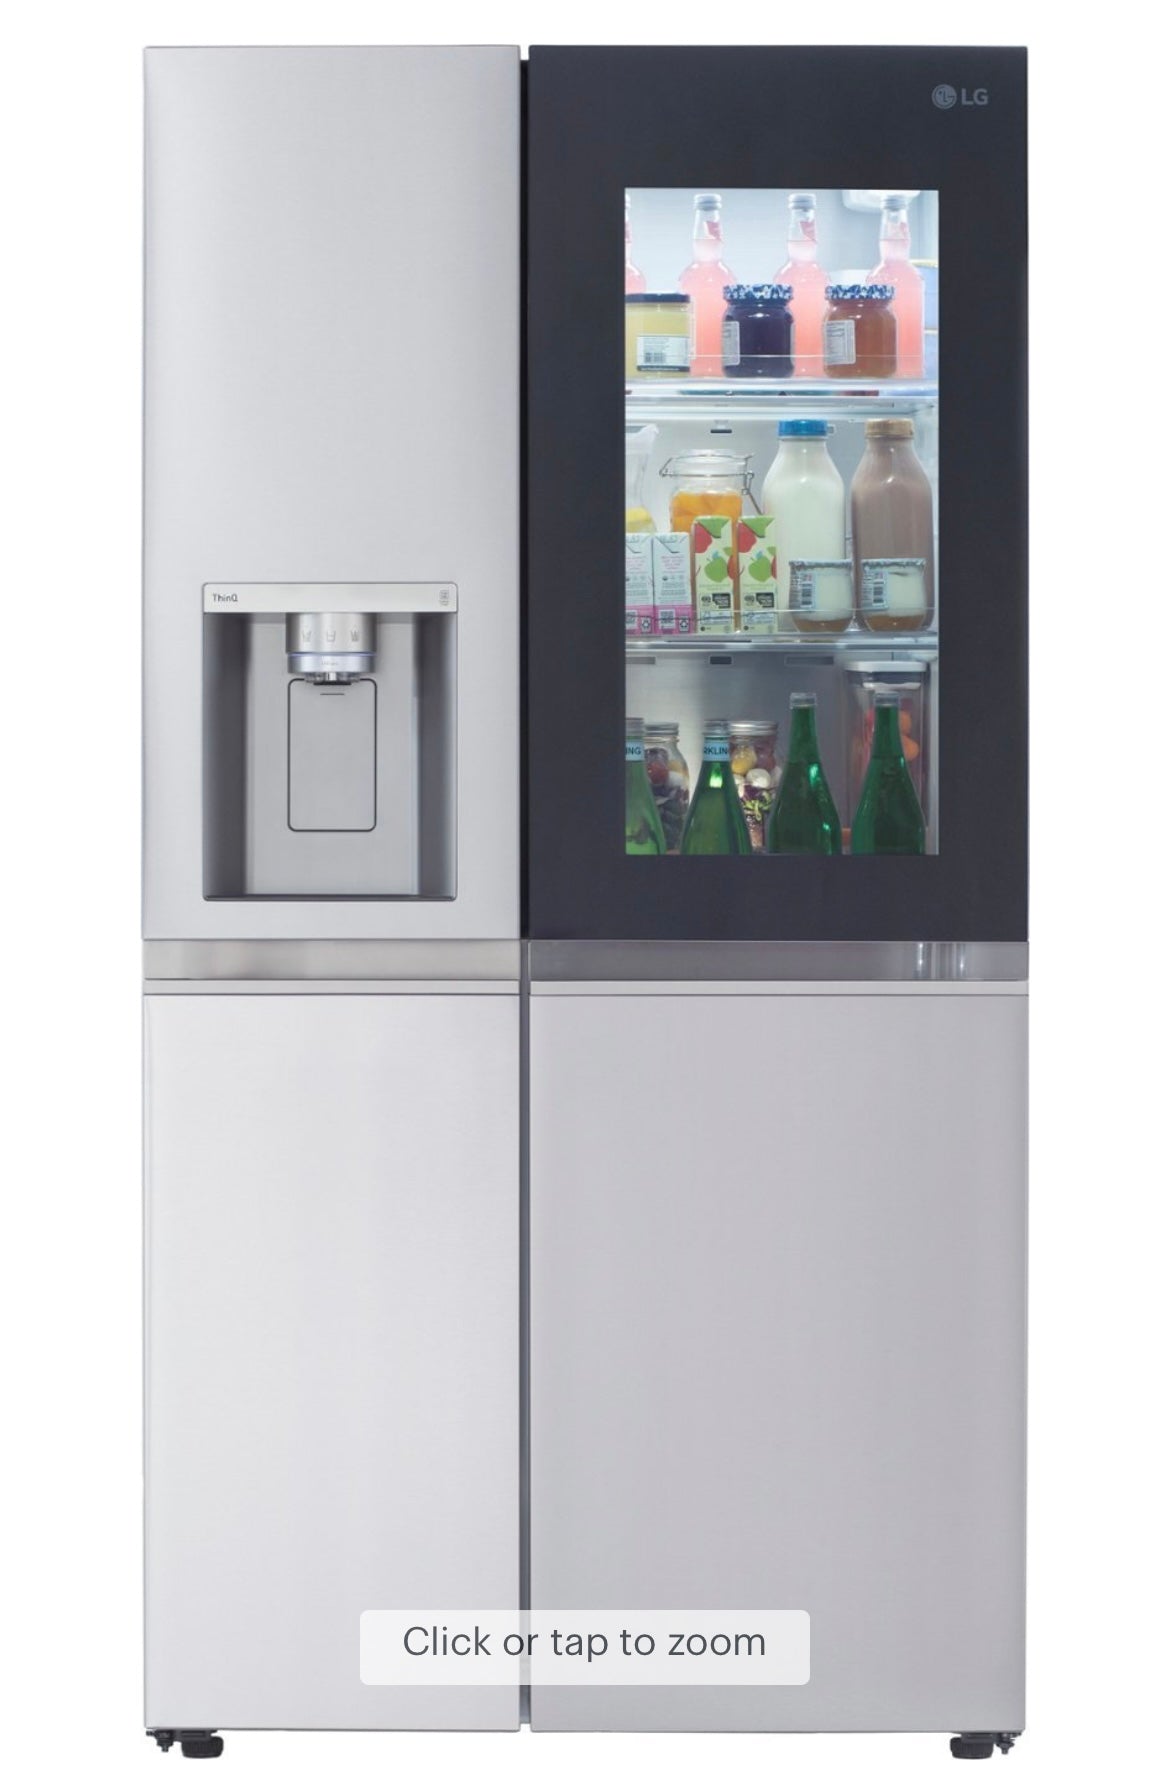 LG - 27 Cu. Ft. Side-by-Side Smart Refrigerator with Craft Ice - Stainless Steel